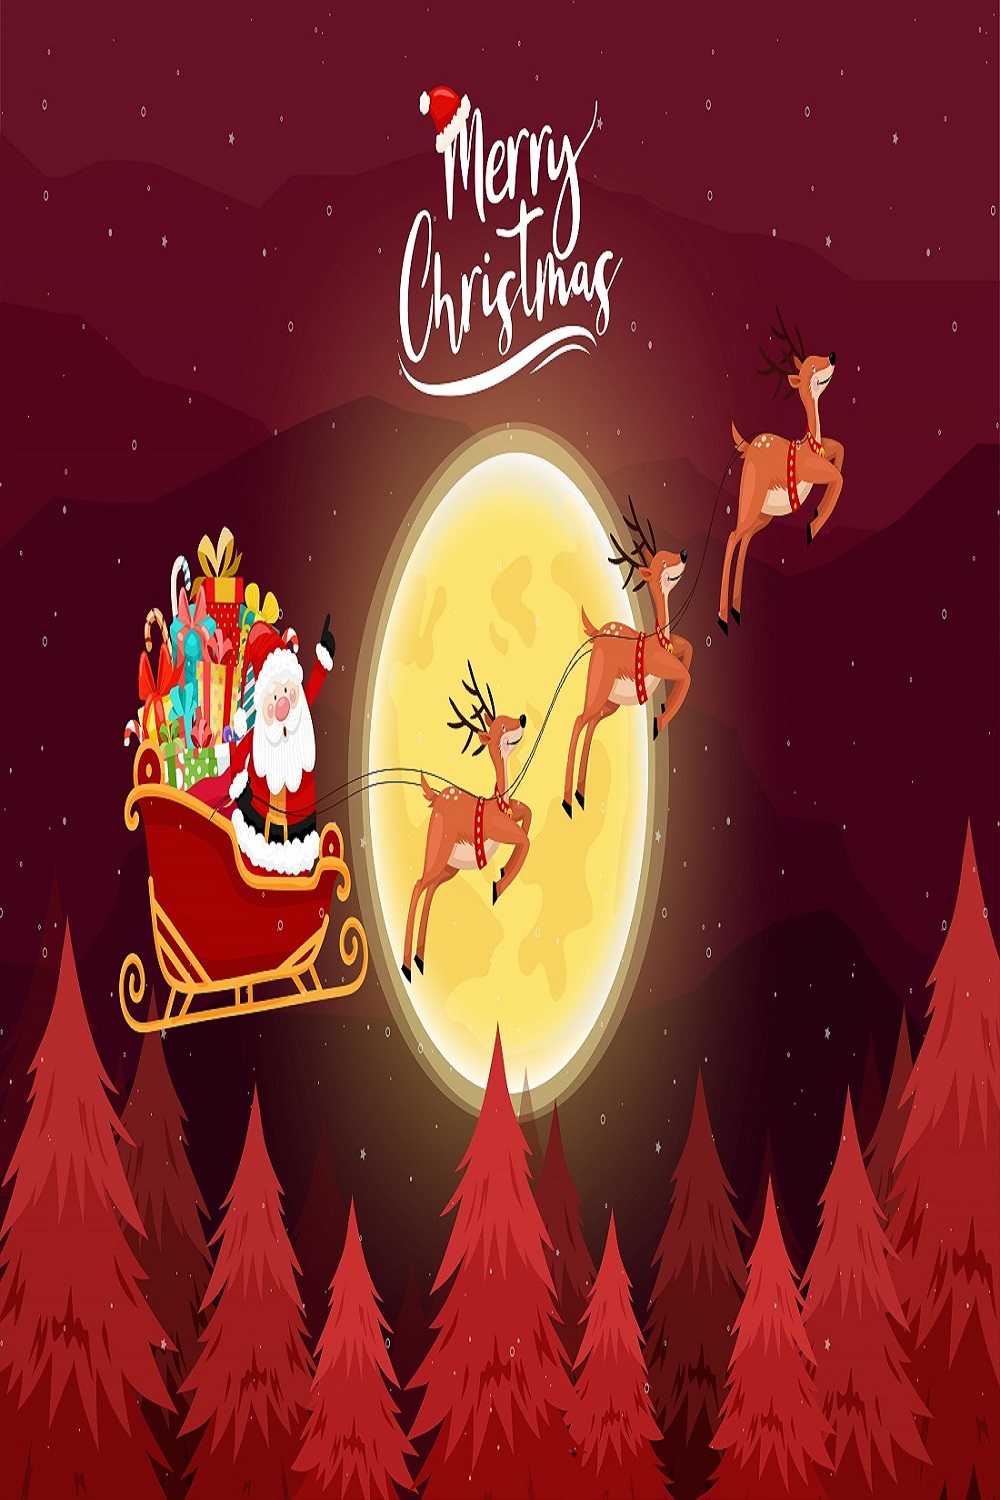 Merry Christmas card with Santa must ride sleigh pinterest preview image.